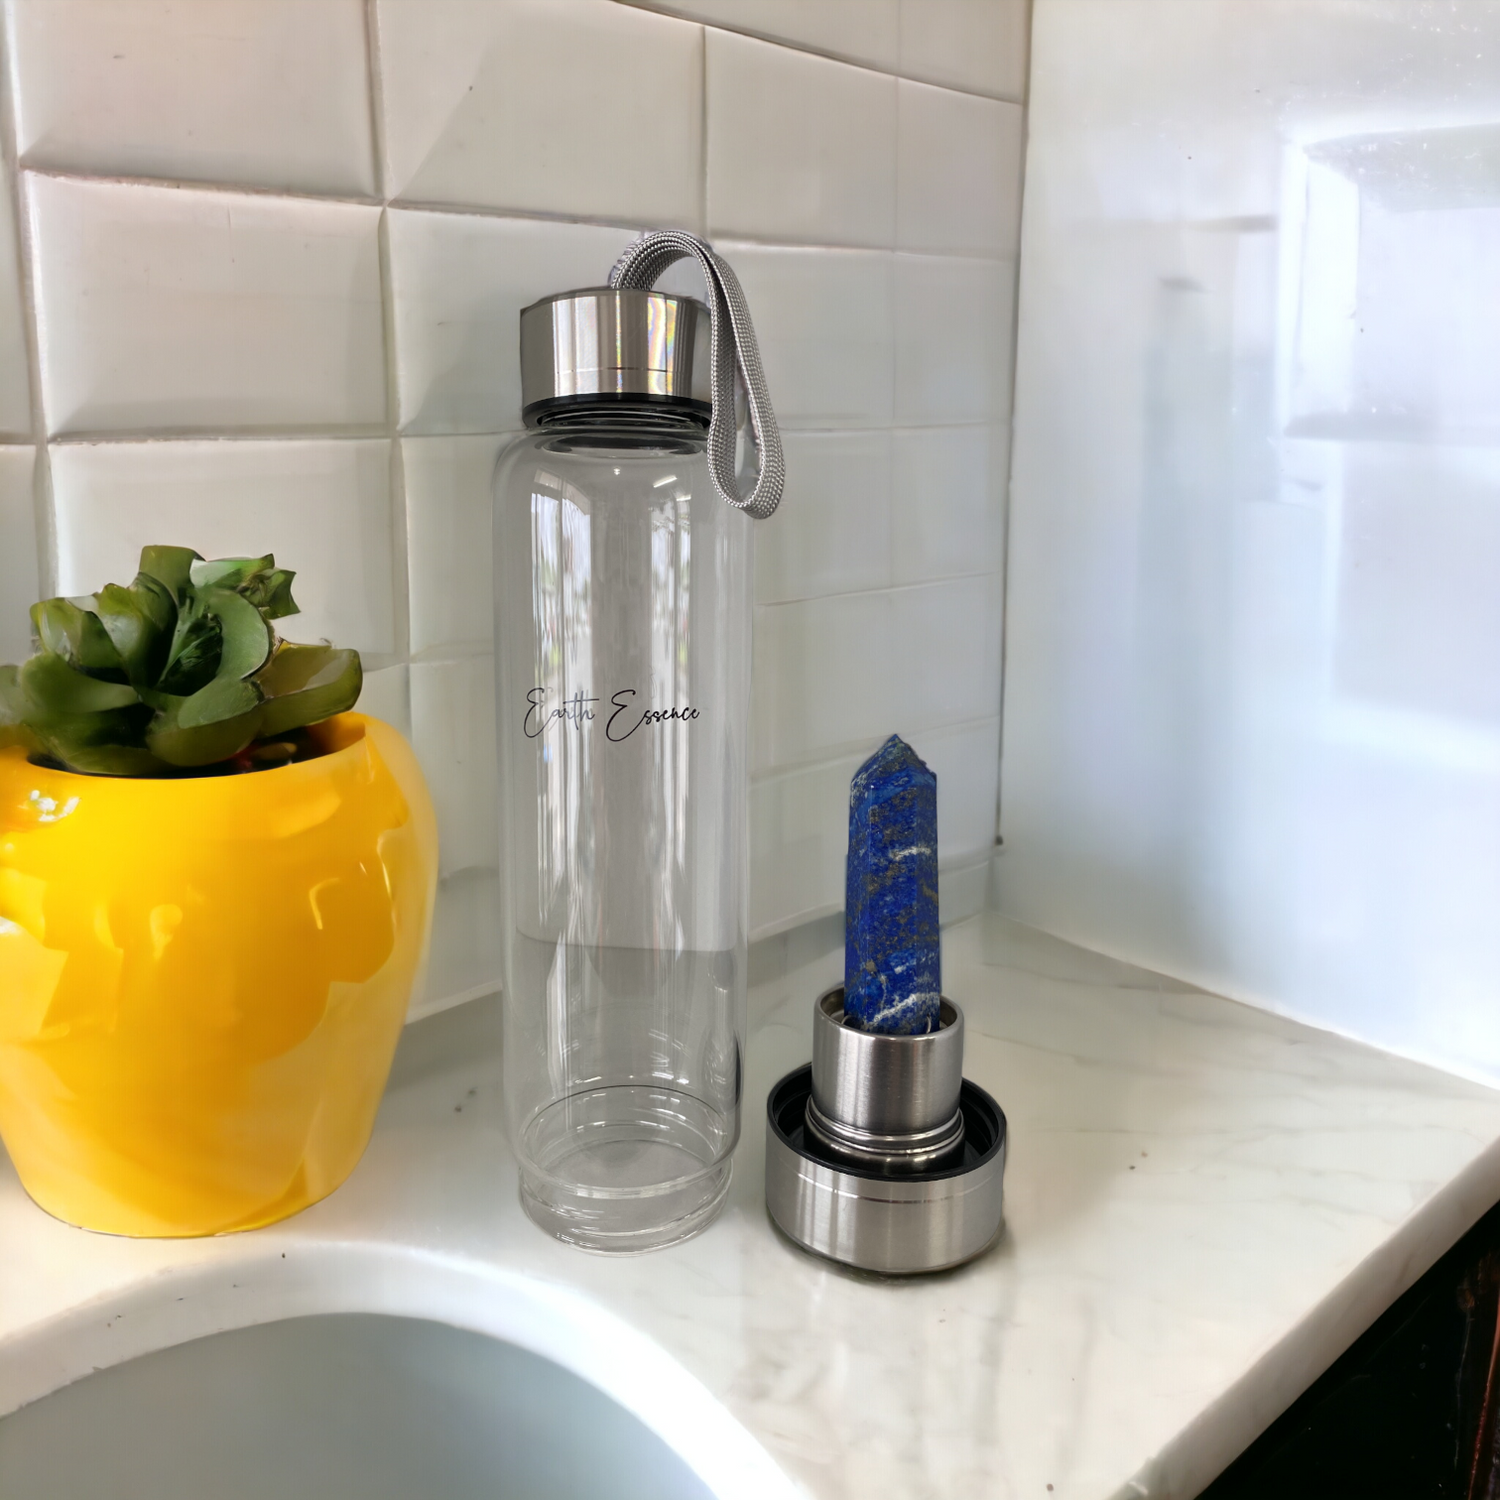 Crystal Point Water Bottle - Lapis